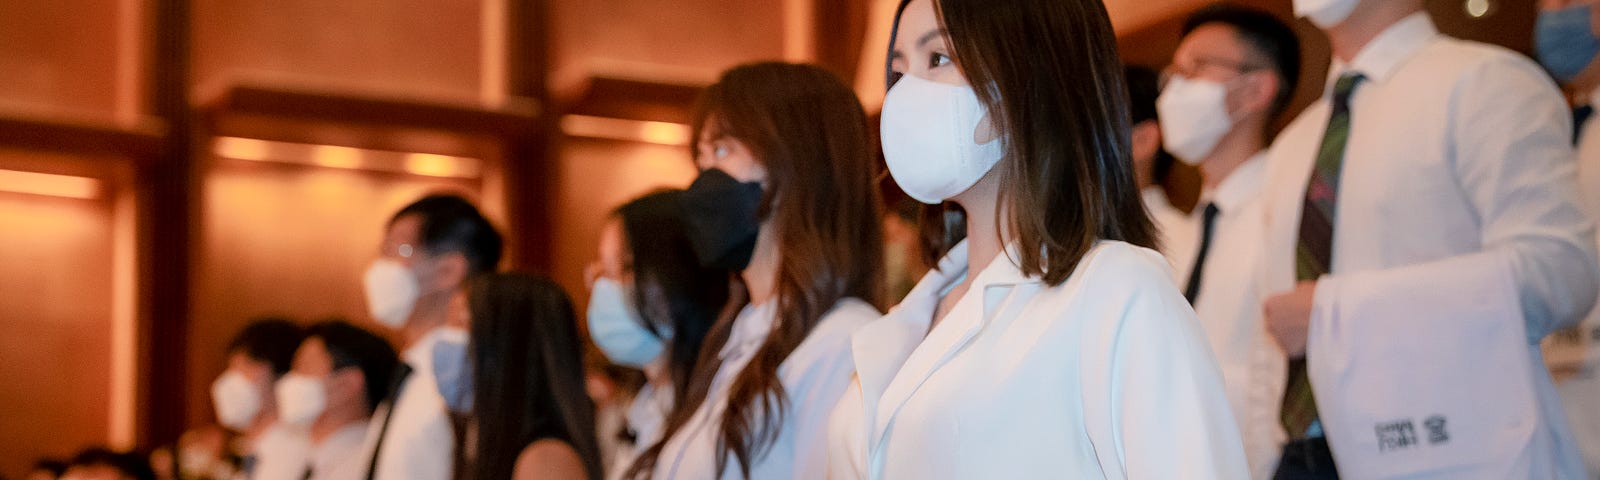 Students stand in rows with their white coats over their arms